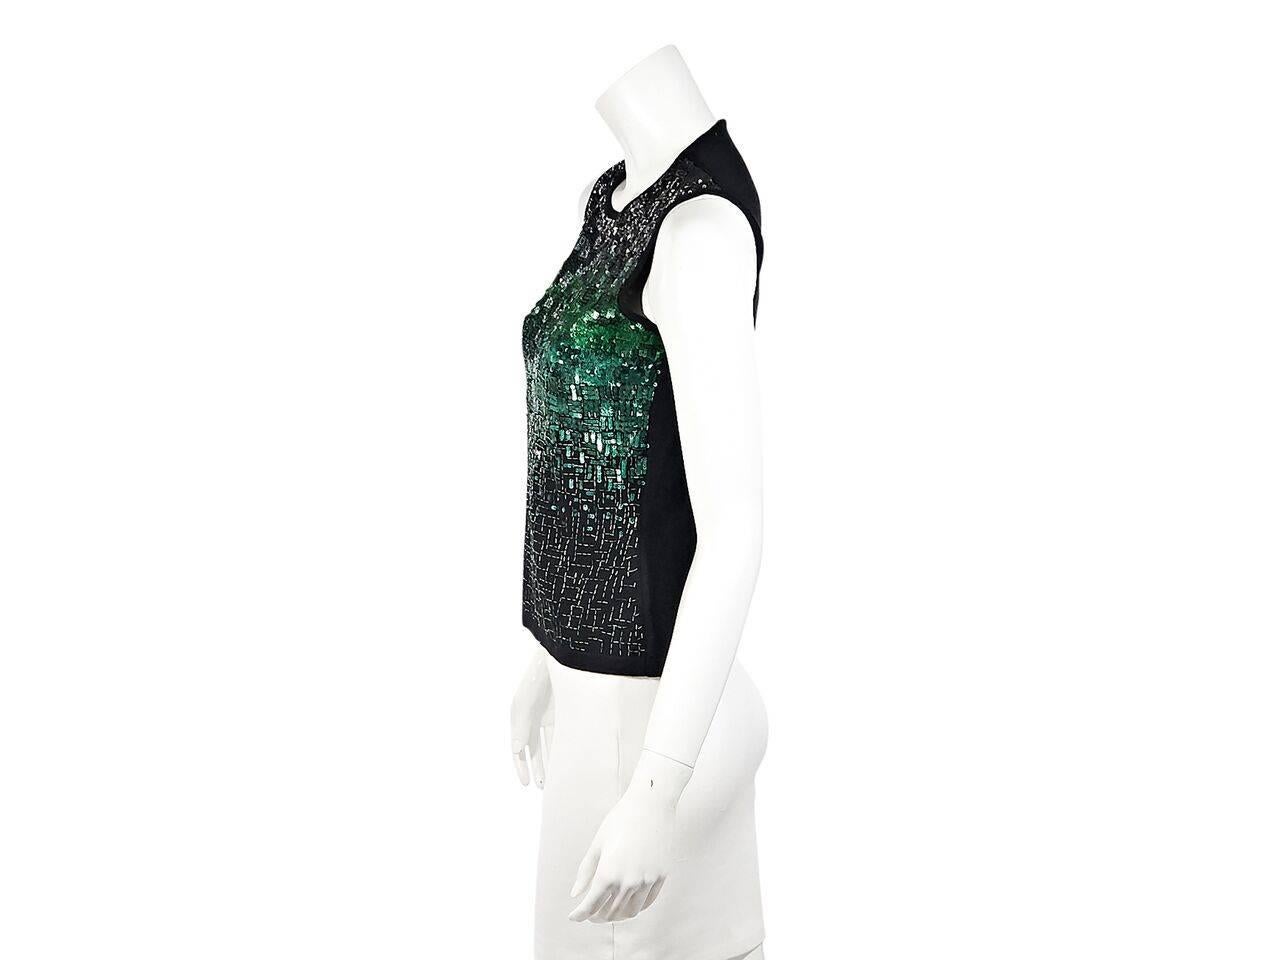 Product details:  Multicolor sequin front wool/cashmere-blend top by Oscar de la Renta.  Jewelneck.  Sleeveless.  Single button back with keyhole cutout.  Pullover style. 
Condition: Pre-owned. Very good.
Est. Retail $ 578.00